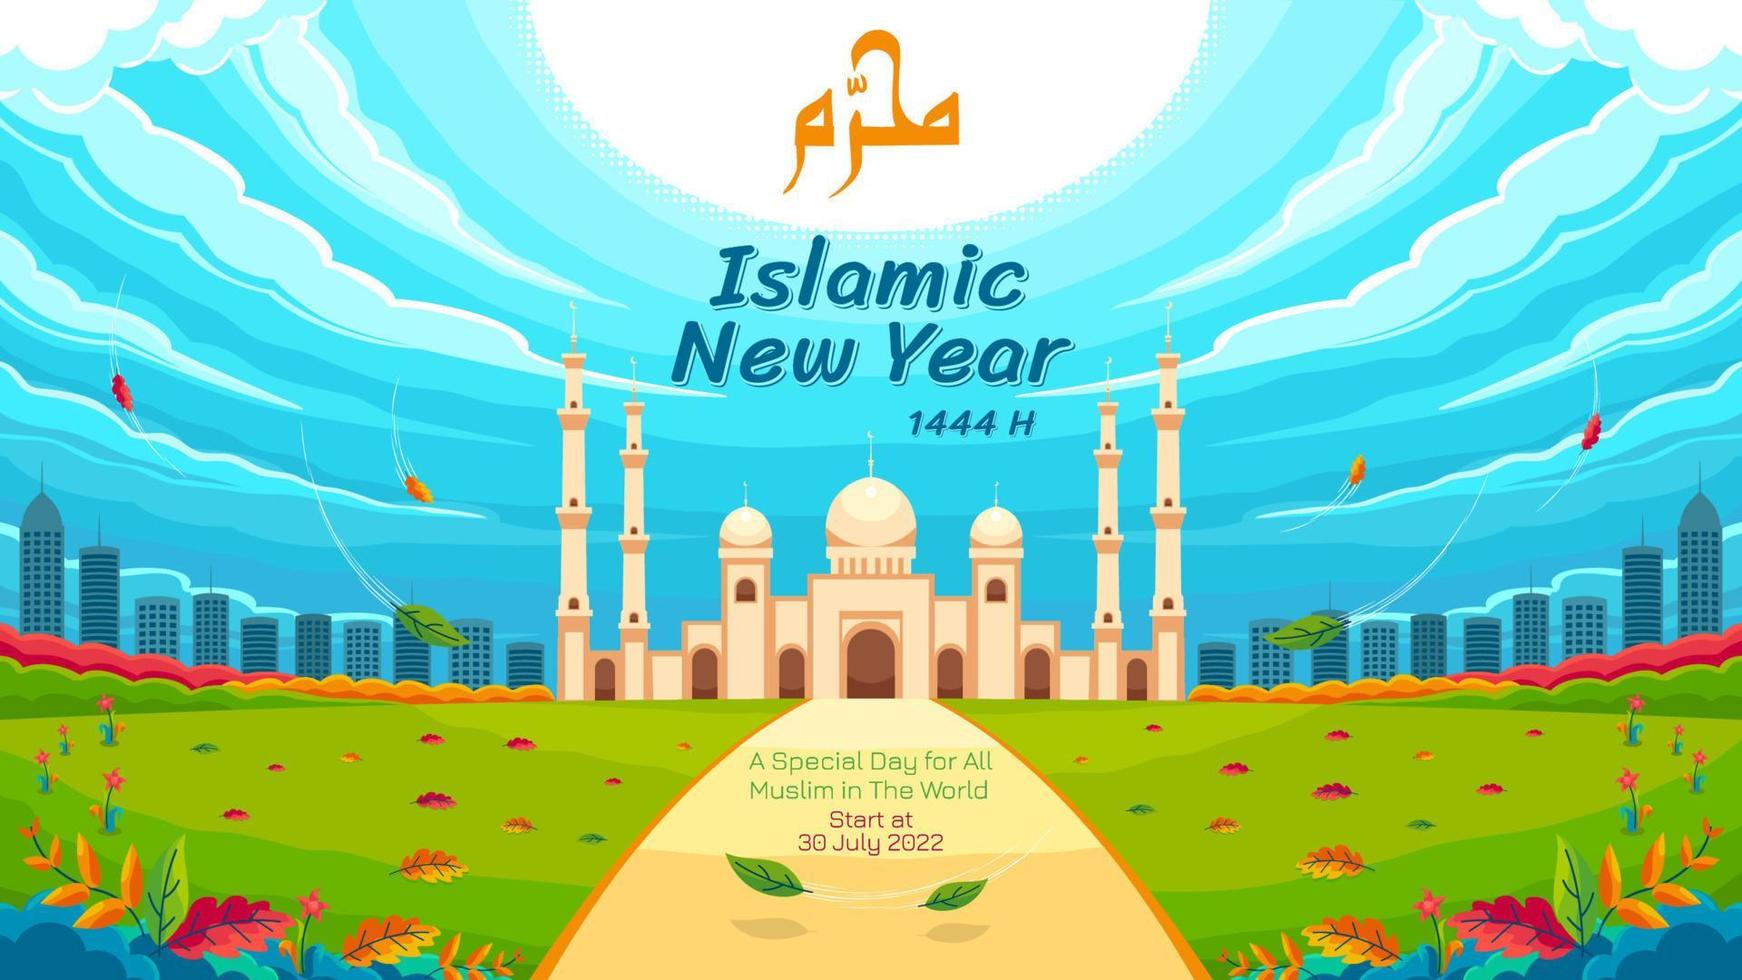 Clear skies, with calm souls in the Islamic new year vector